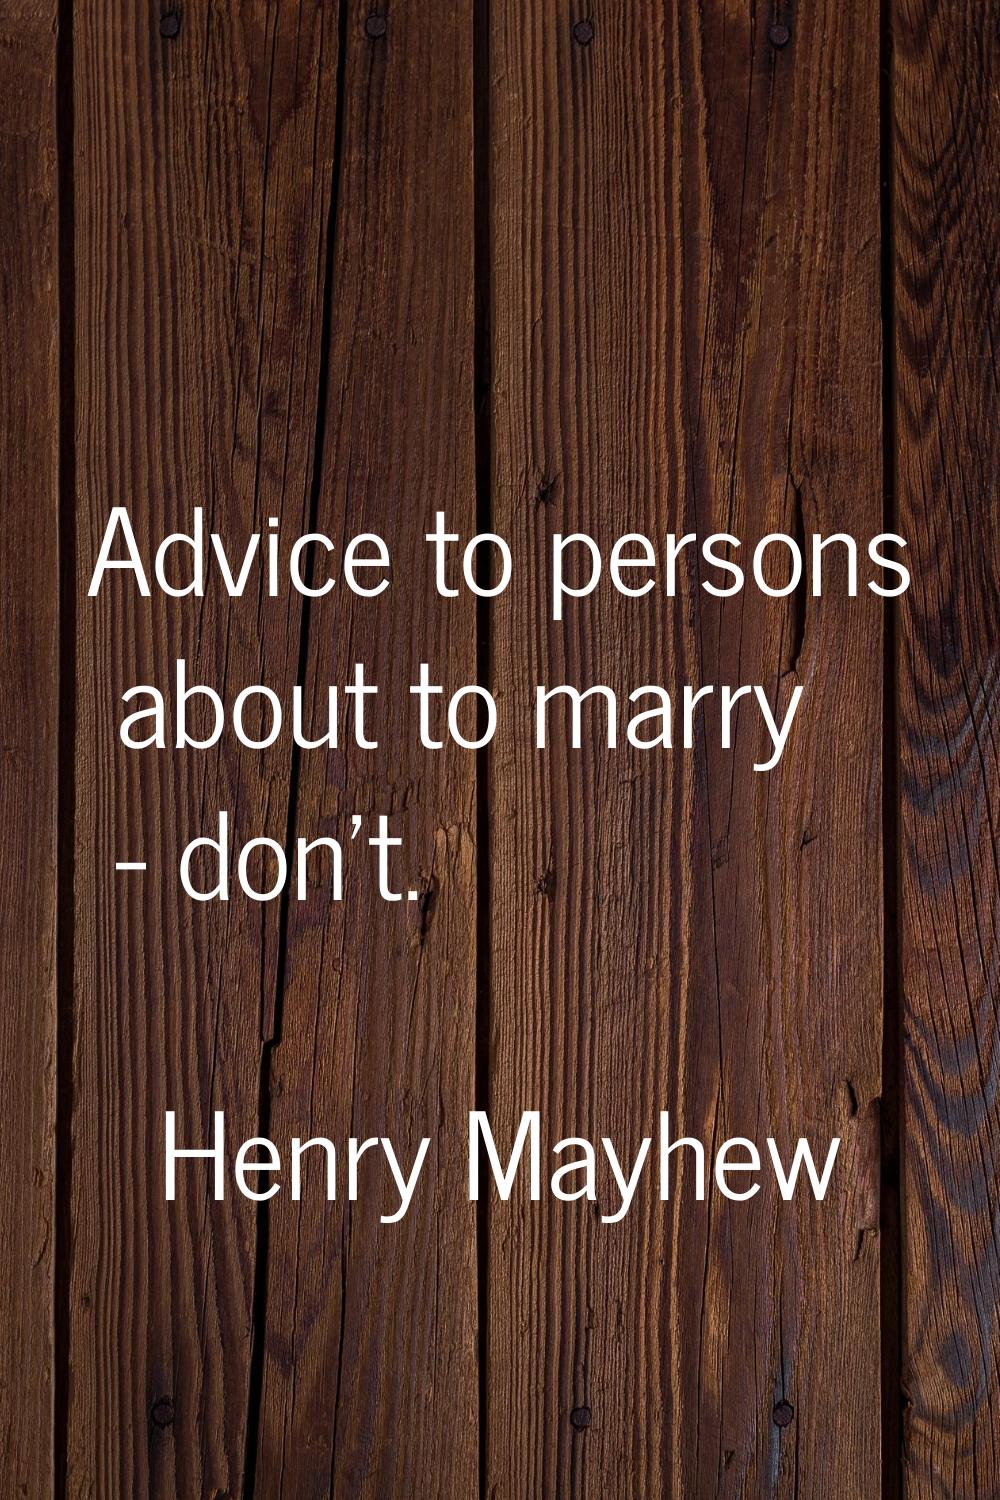 Advice to persons about to marry - don't.